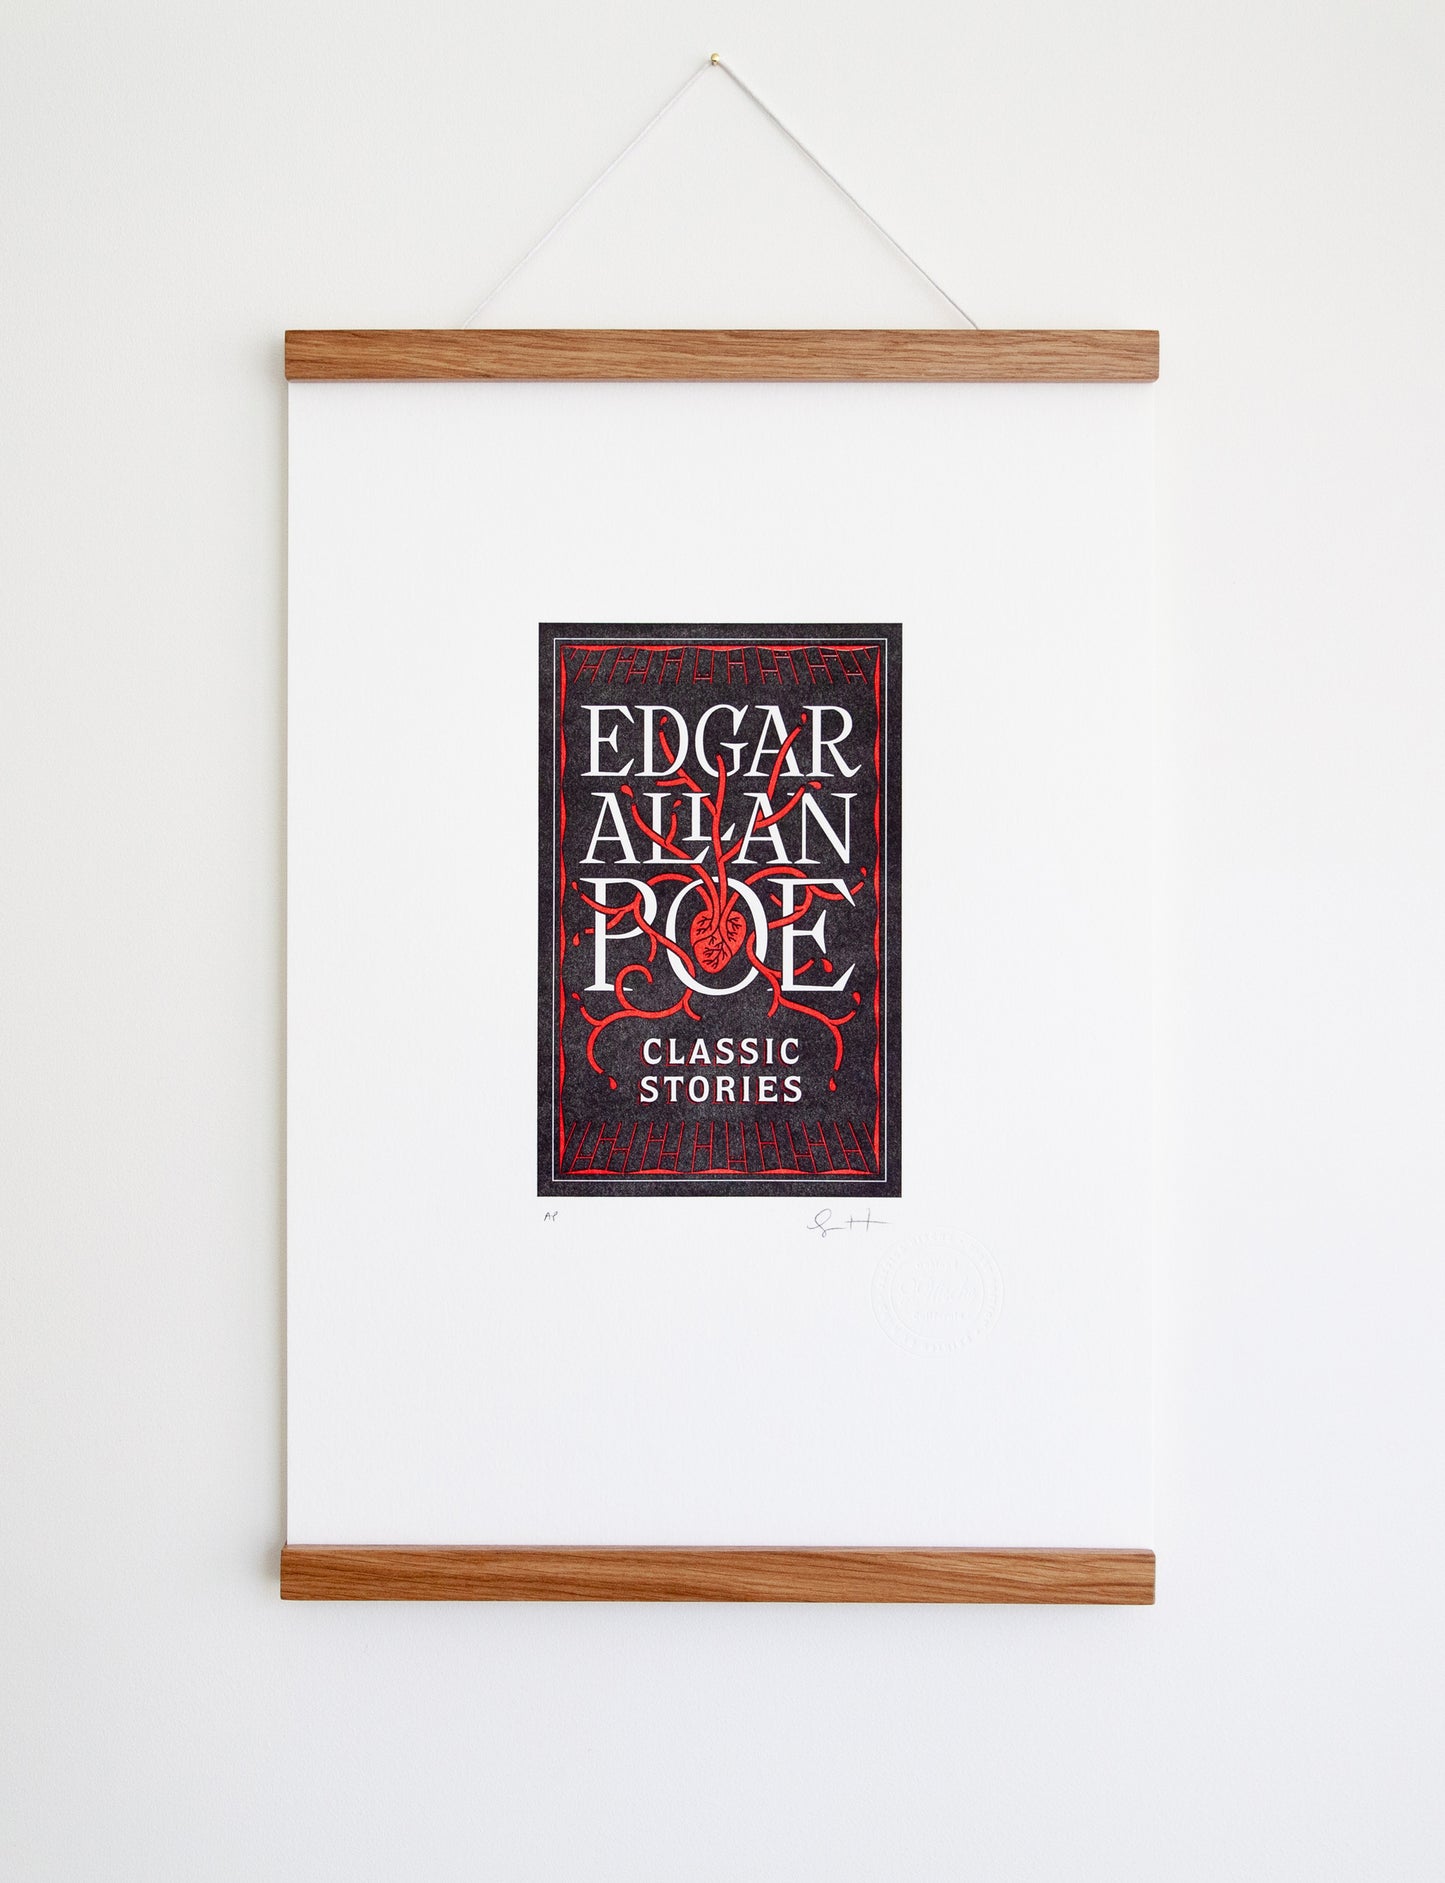 Framed 2-color letterpress print in black and red. Printed artwork is an illustrated book cover of Edgar Allan Poe including custom hand lettering.